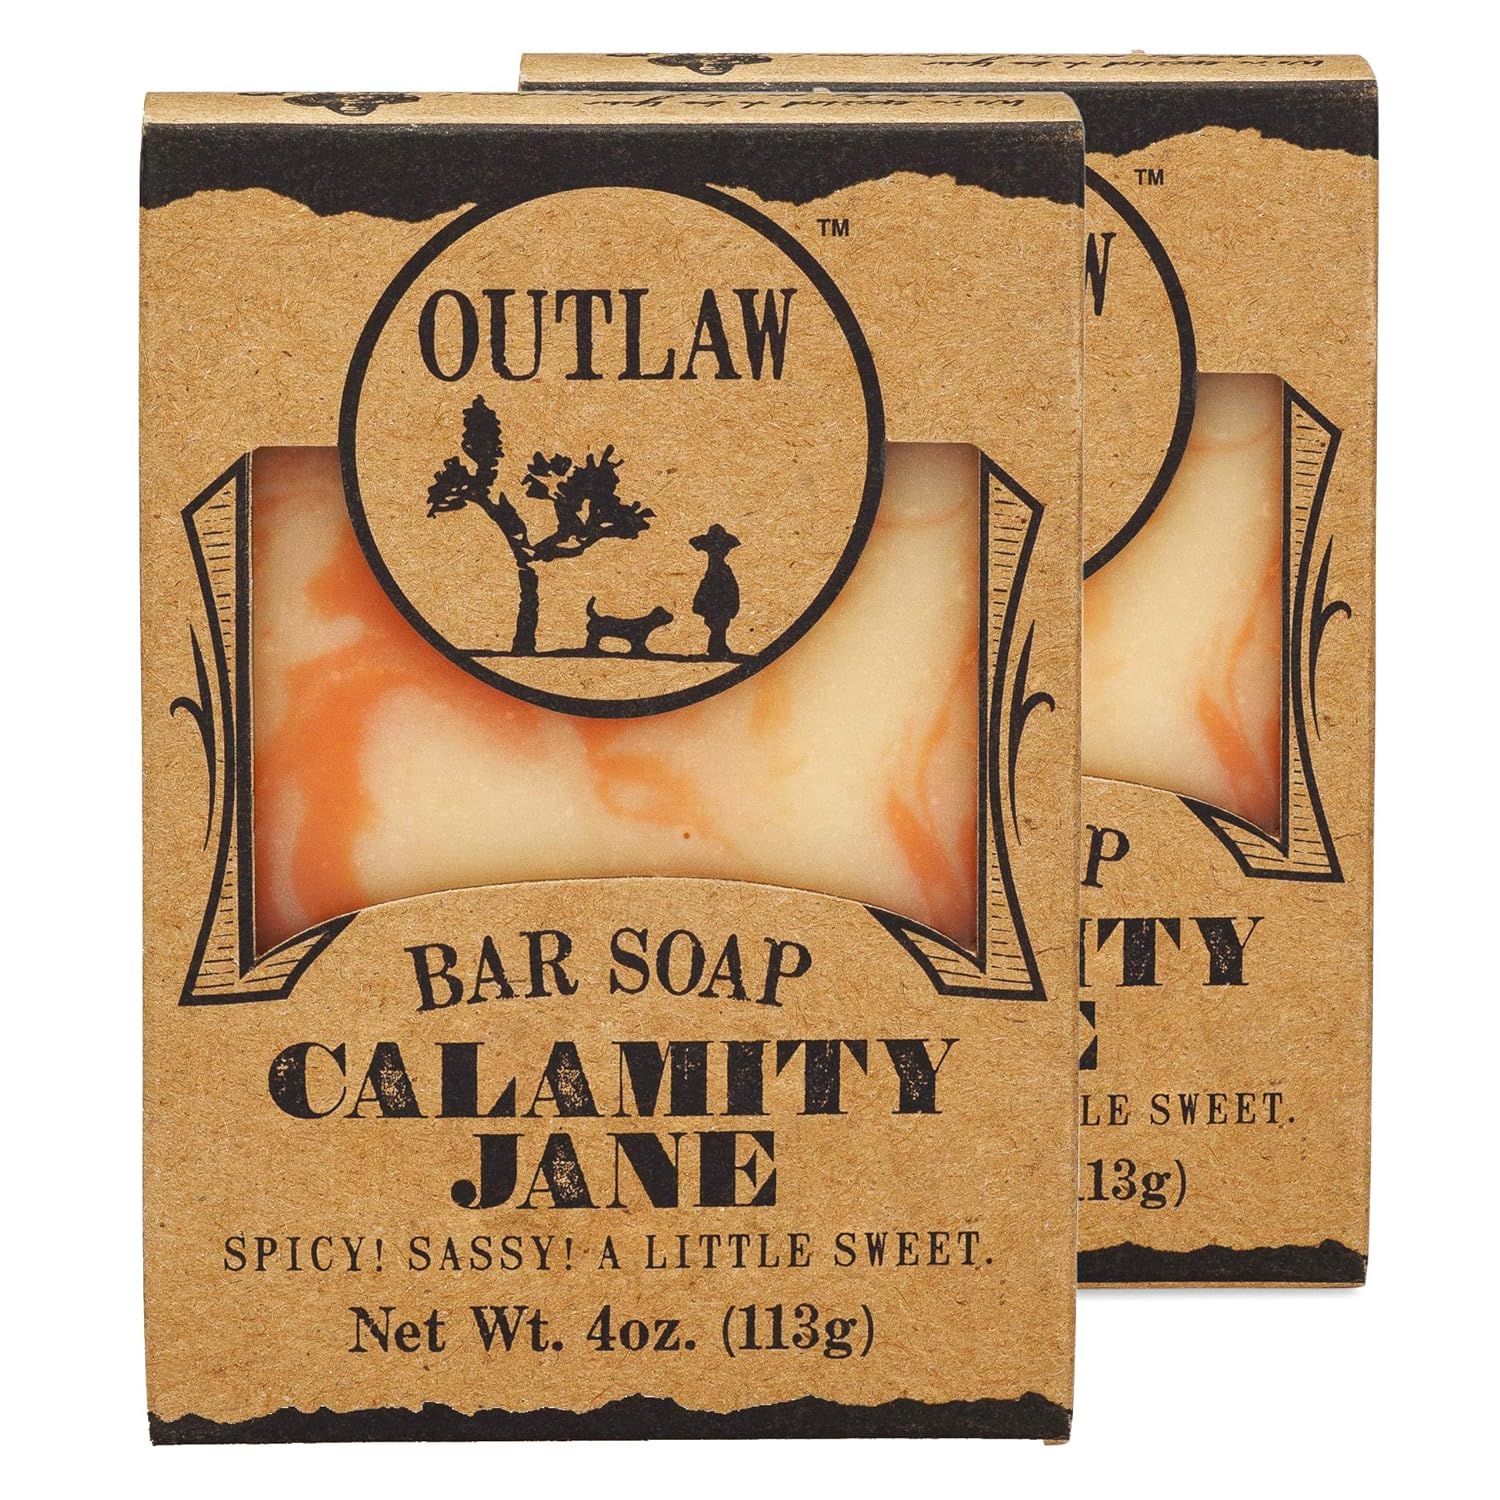 Calamity Jane Spicy Handmade Soap - Spicy and Sweet, Like a Legend - Whiskey, Clove, Orange, and a Little Cinnamon - Men's or Women's Bar Soap - 2 Pack - Outlaw